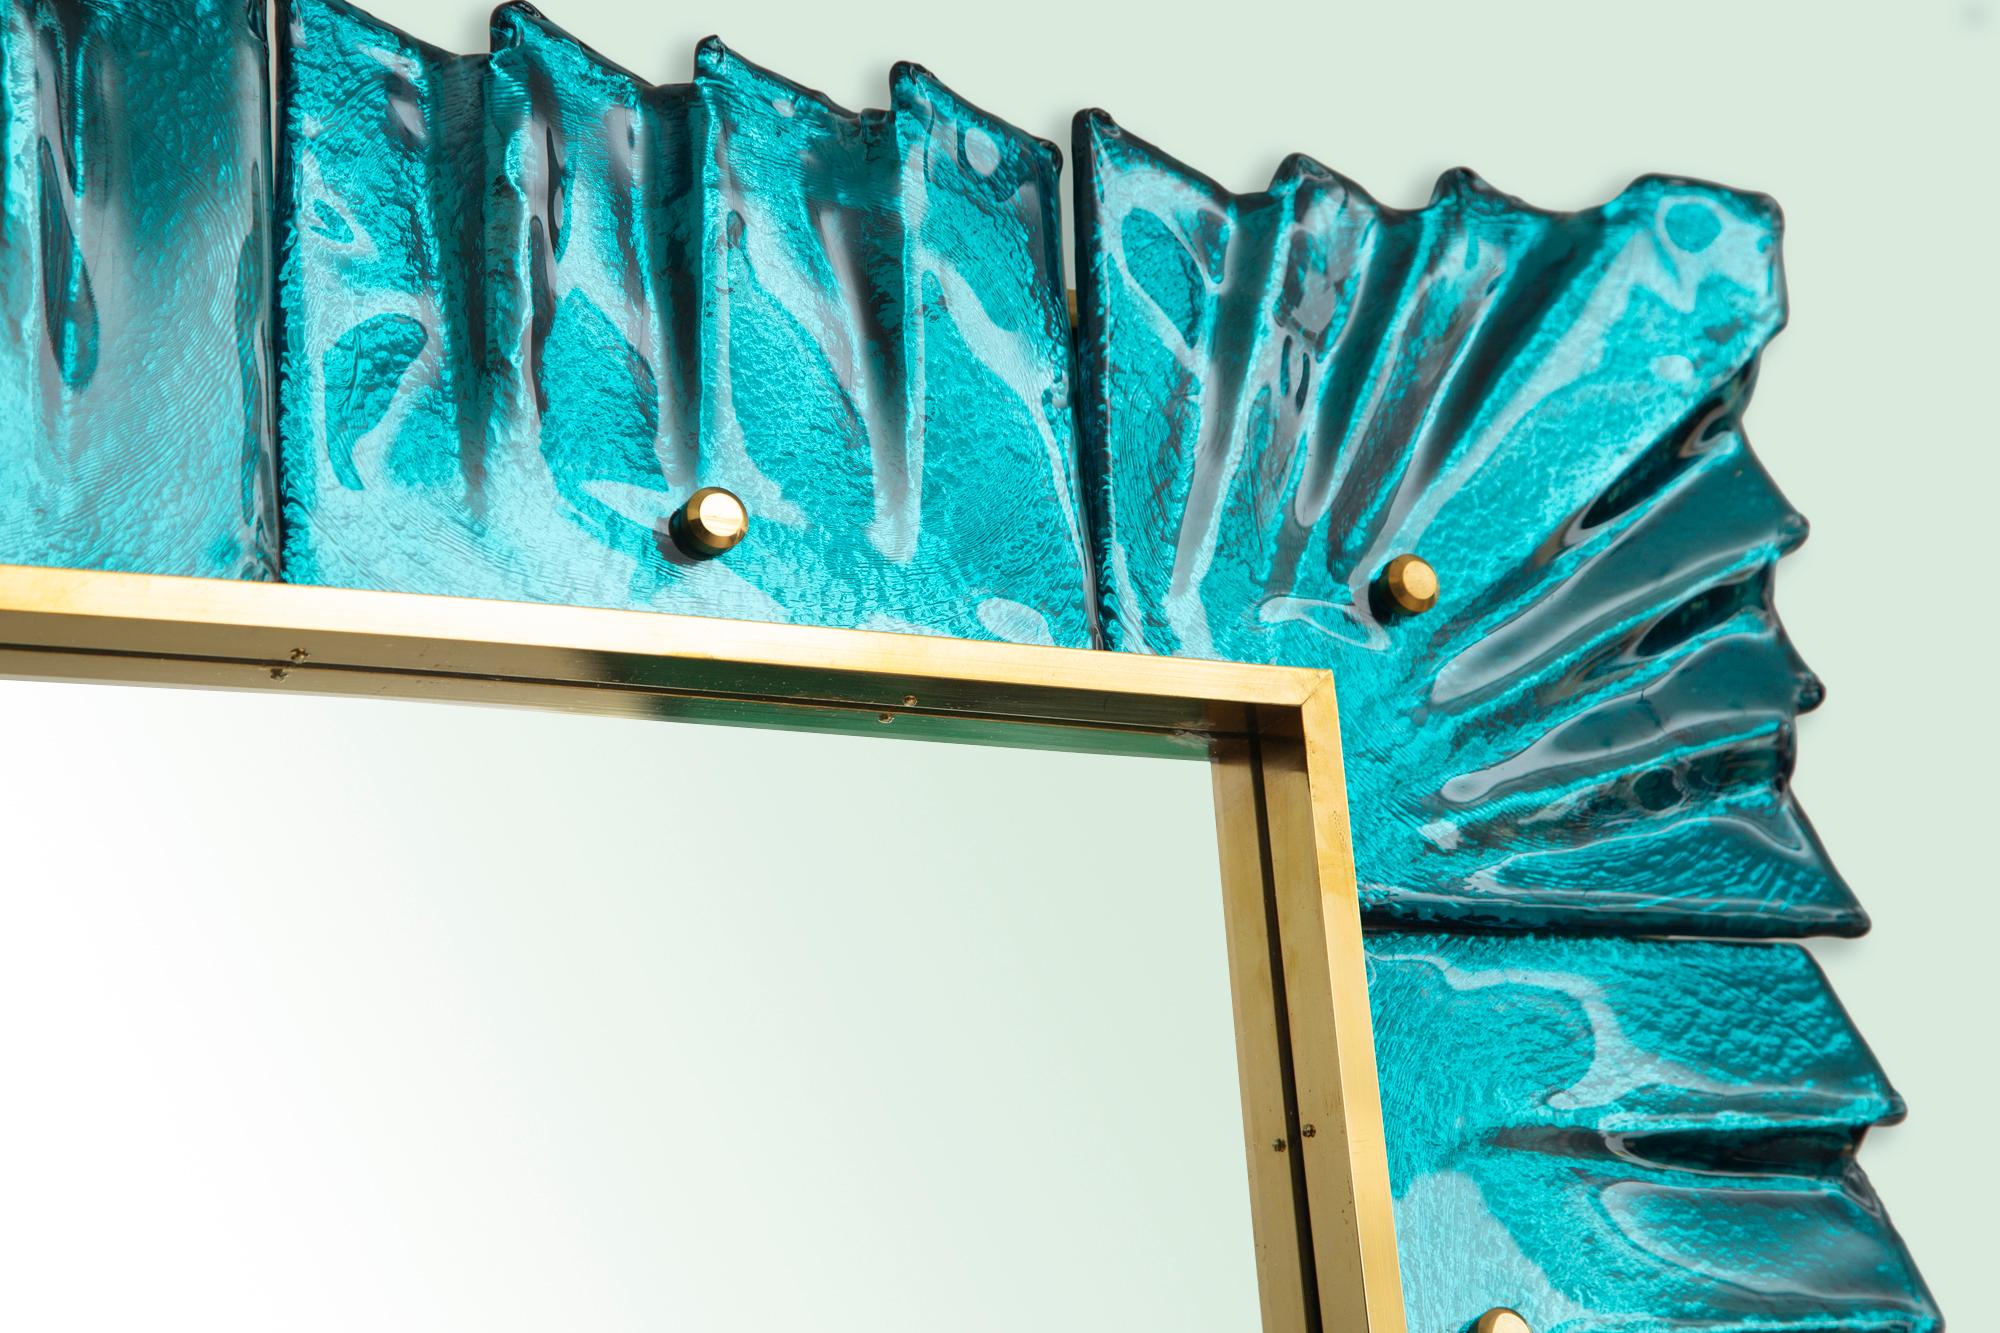 Contemporary Murano aquamarine glass framed mirror, in stock
Rectangular mirror plate surrounded with undulating glass tiles in aqua marine color held by brass cabochons.
Brass surrounding gallery
Handcrafted by a team of artisans in Venice,